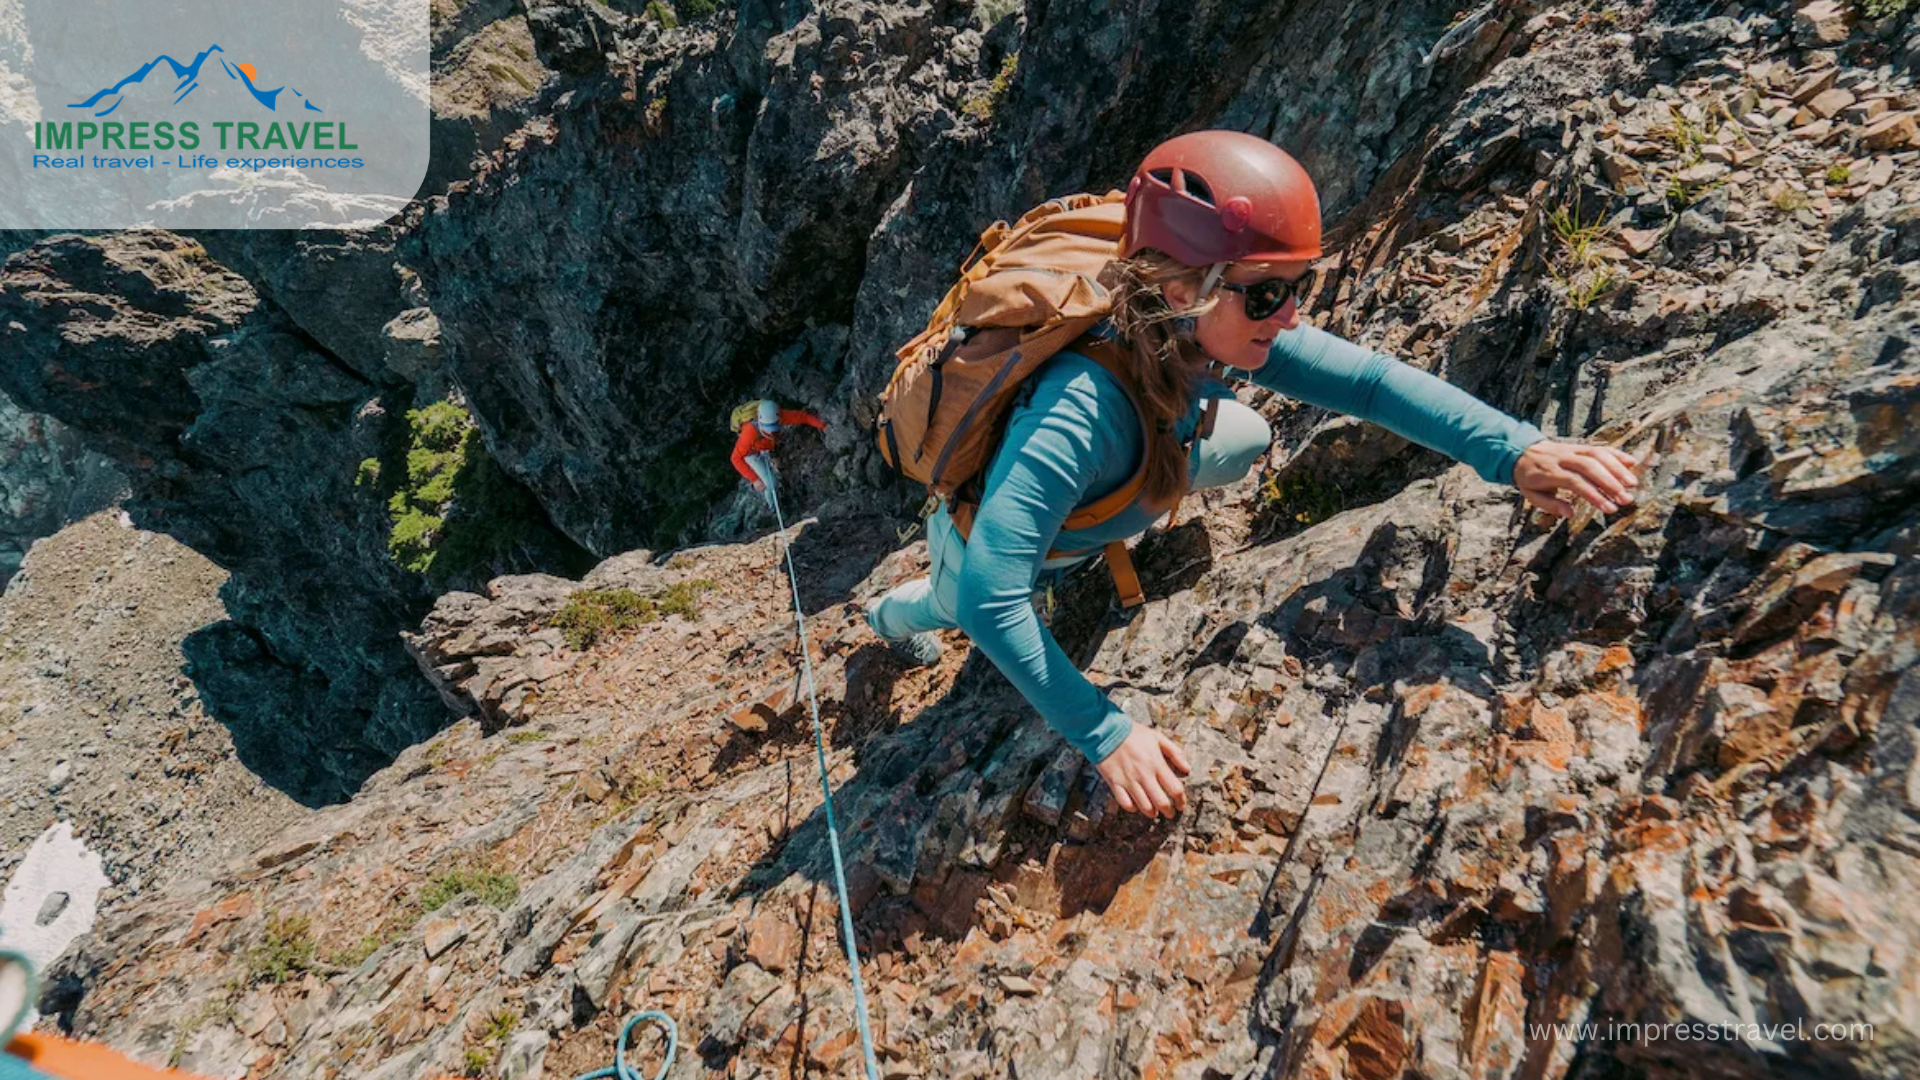 Must-Have Gear for Mountain Climbing Adventures